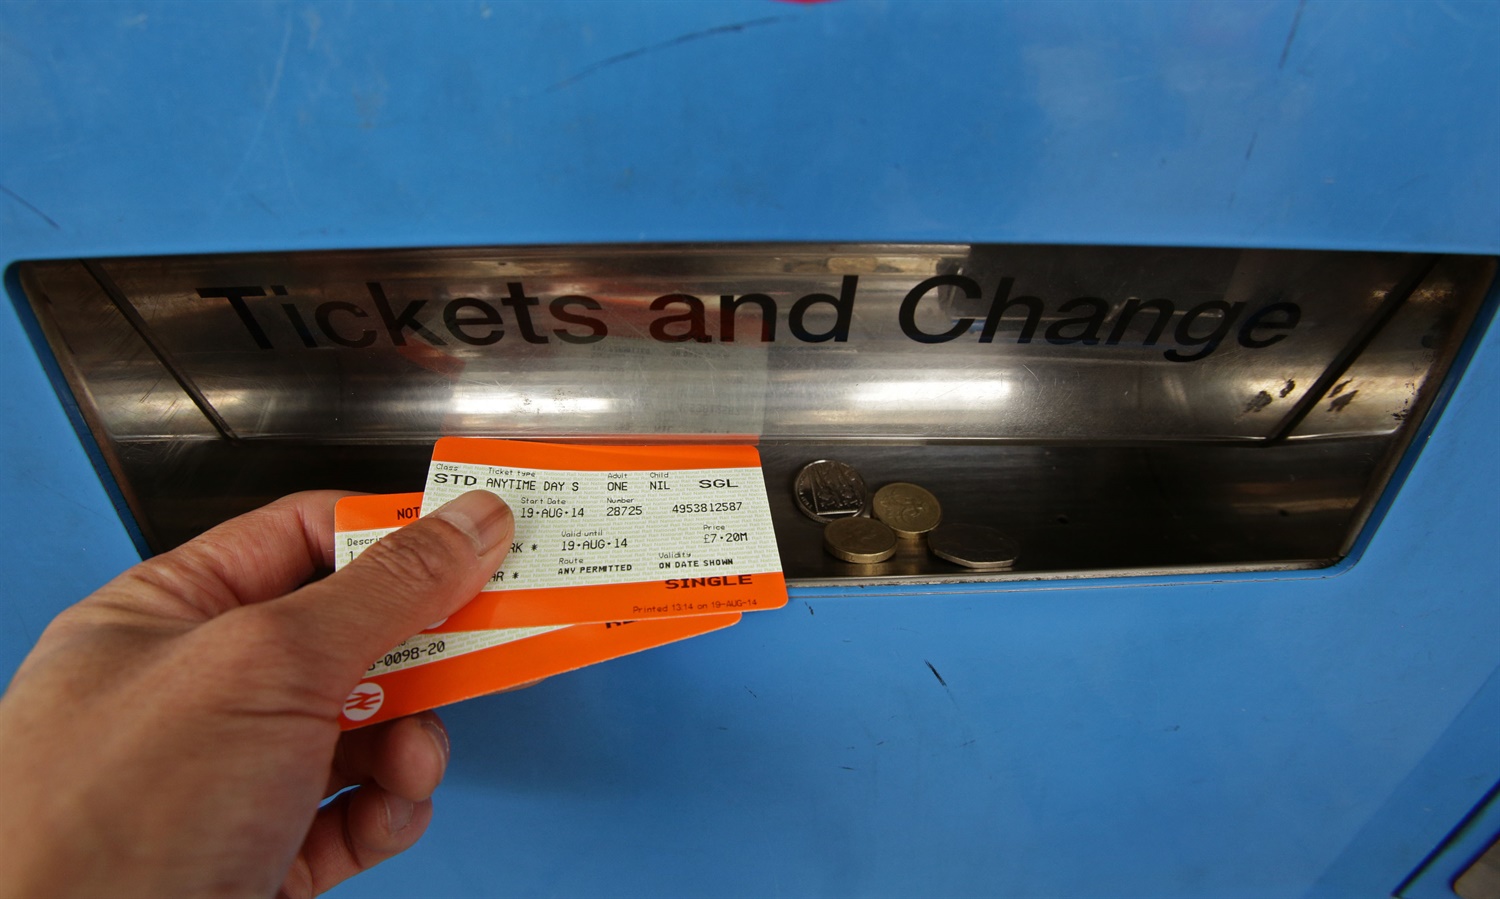 Rail industry to help make buying train tickets easier